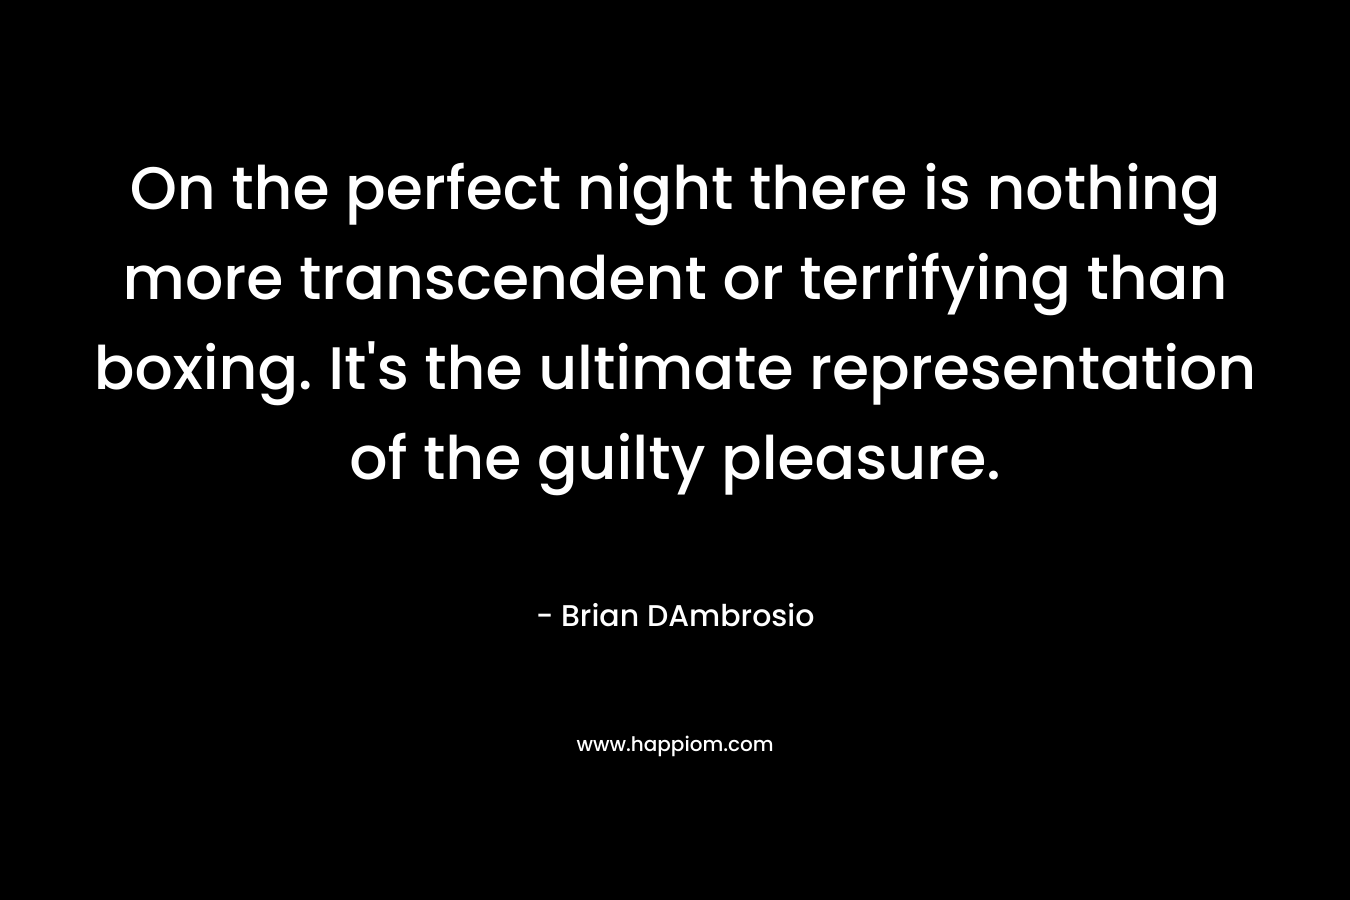 On the perfect night there is nothing more transcendent or terrifying than boxing. It’s the ultimate representation of the guilty pleasure. – Brian DAmbrosio